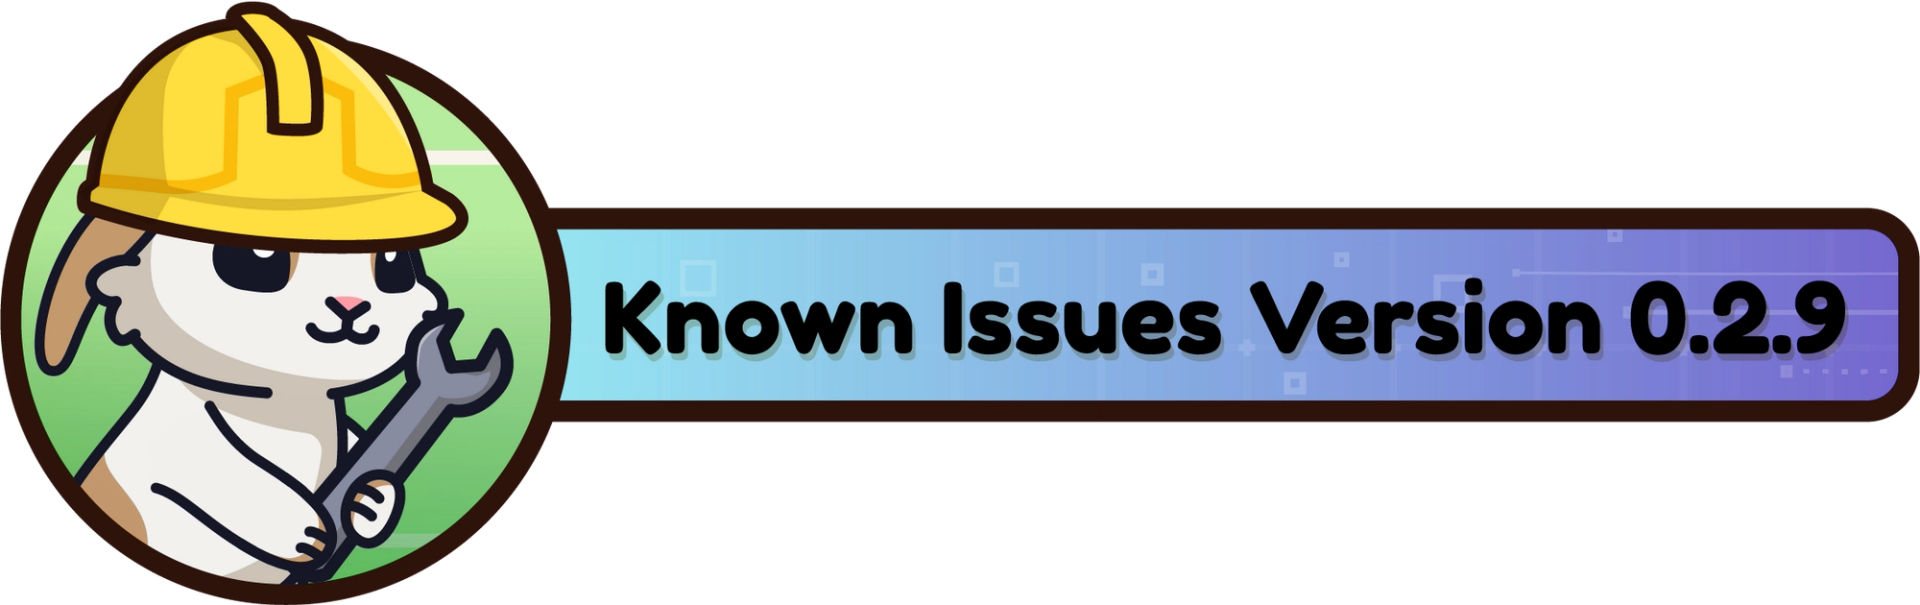 Known Issues Version 0.2.9